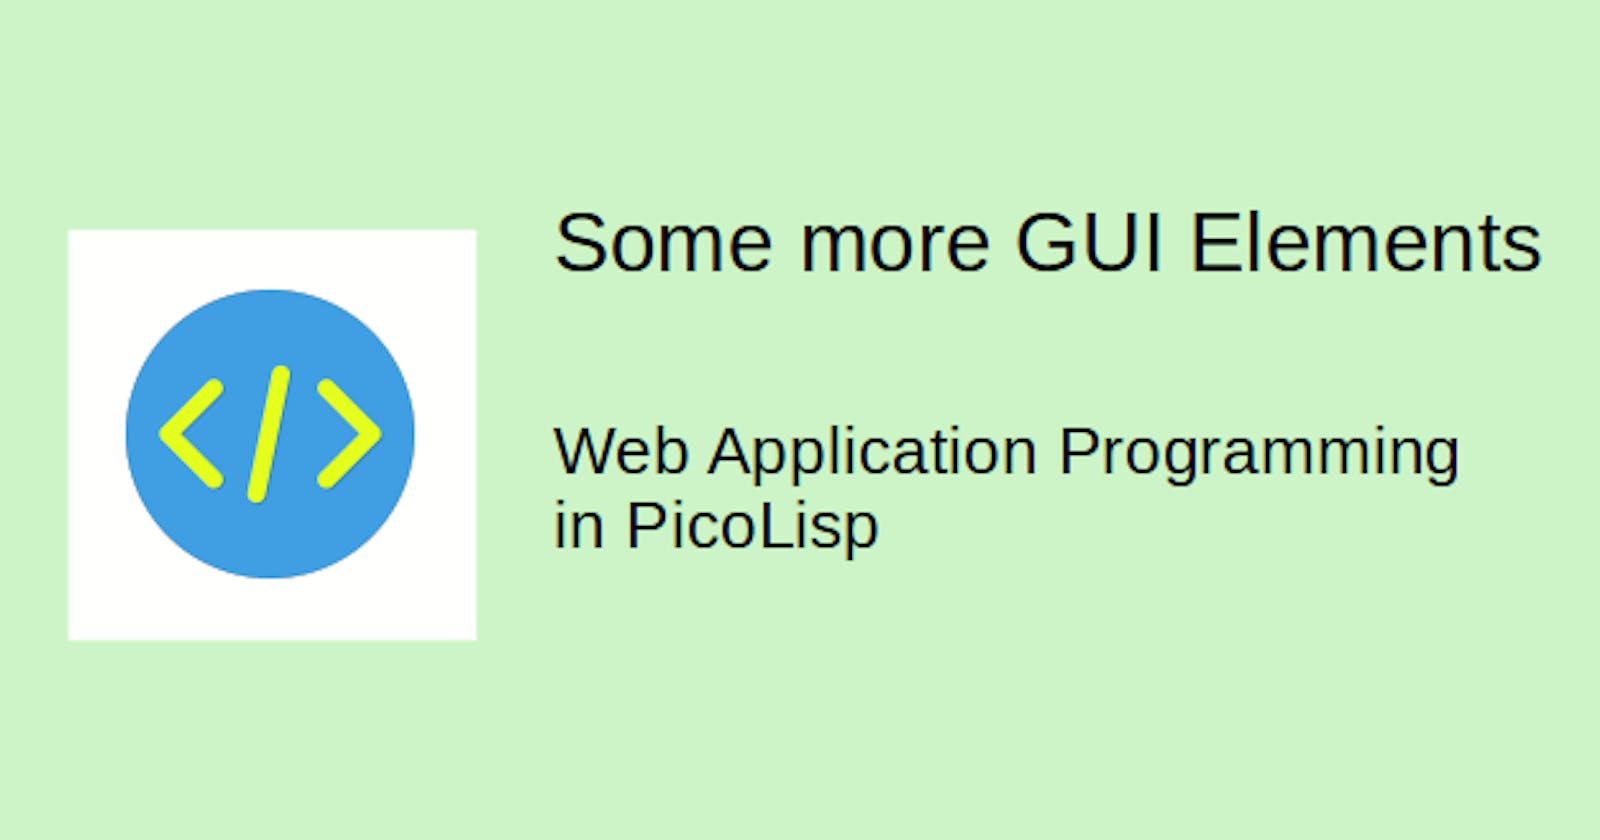 Web Application Programming in PicoLisp: Some more GUI elements